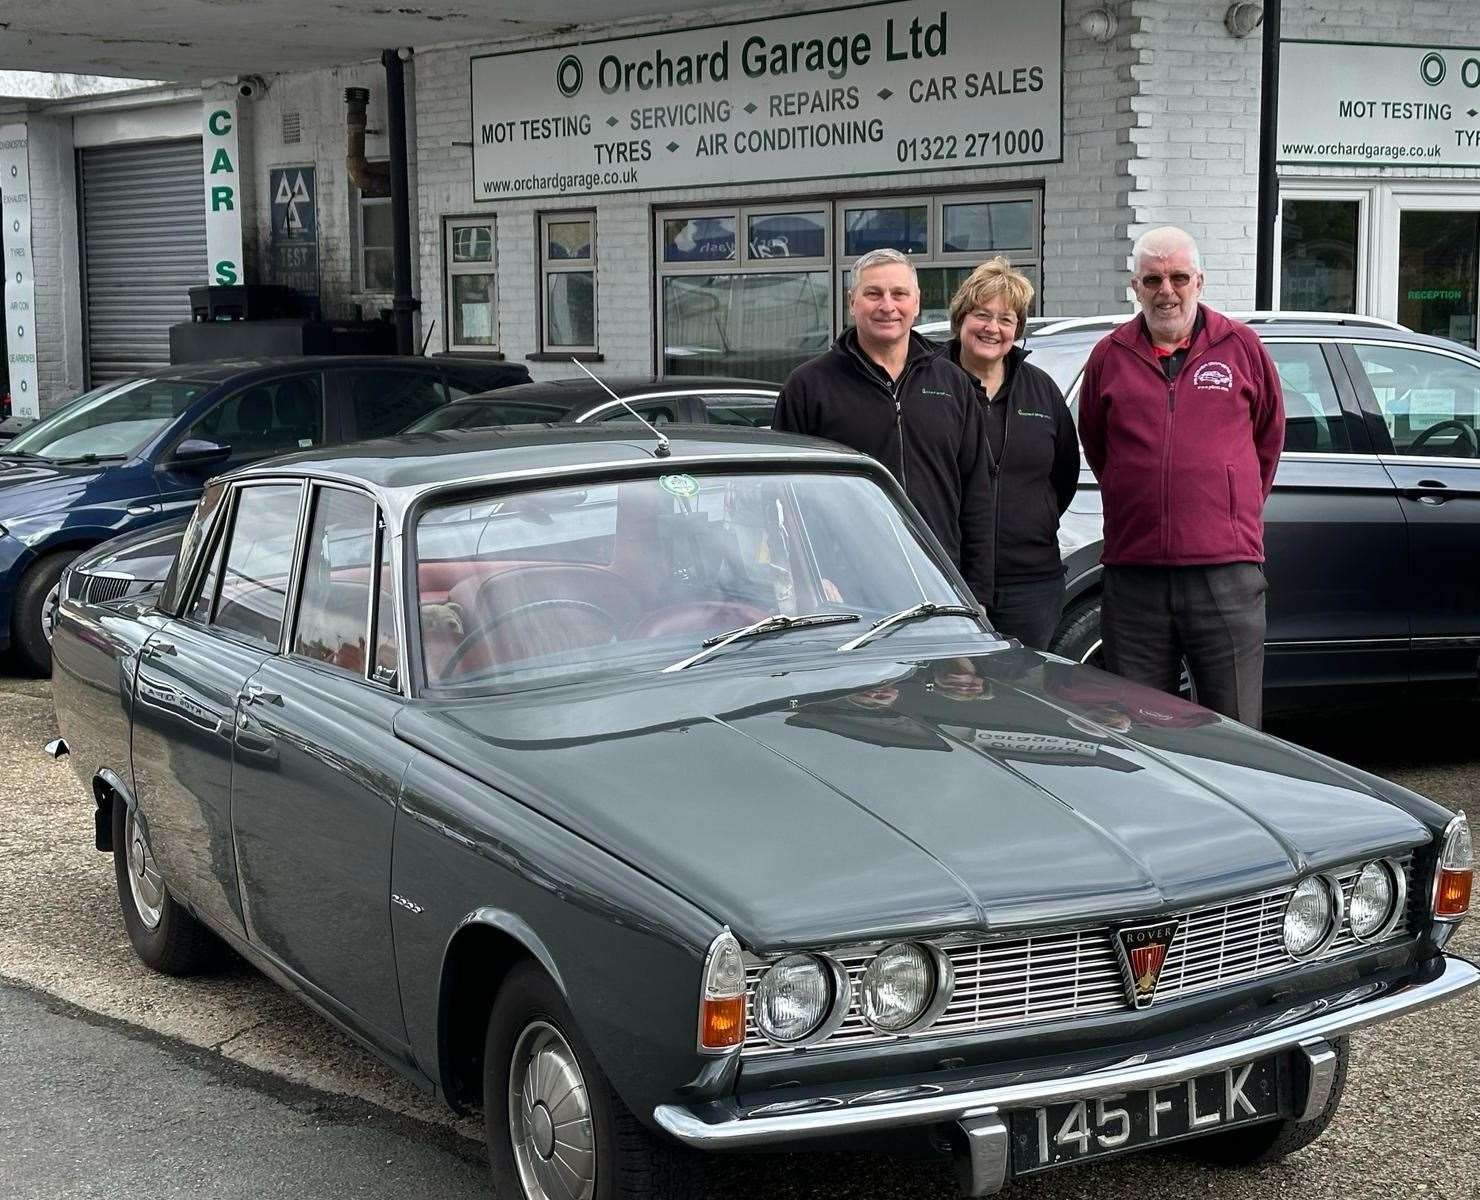 Paul Smith, right, with his Rover P6 and Orchard Garage Limited owners Pam and Geoff Manwaring. Photo credit: Pam Manwaring